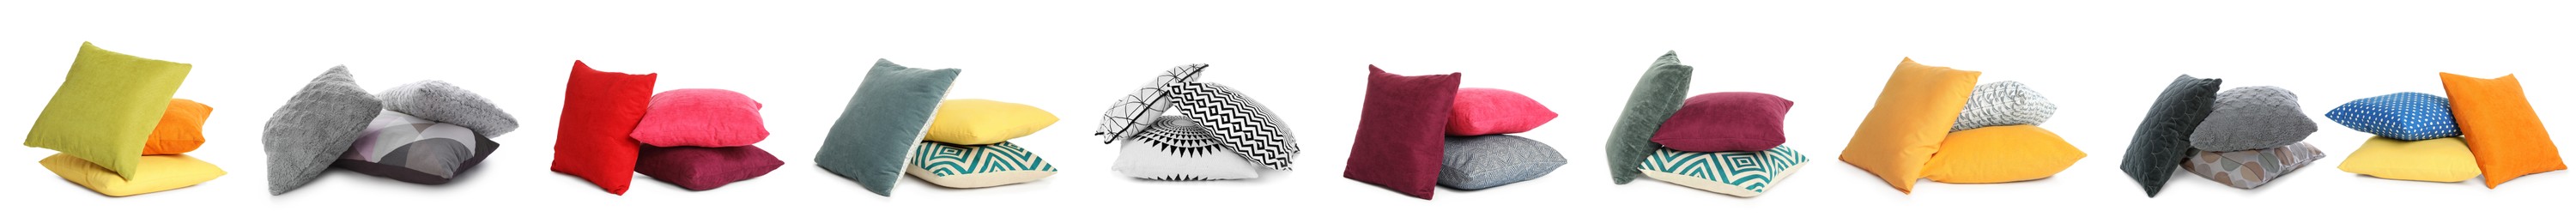 Image of Set with different stylish decorative pillows on white background. Banner design